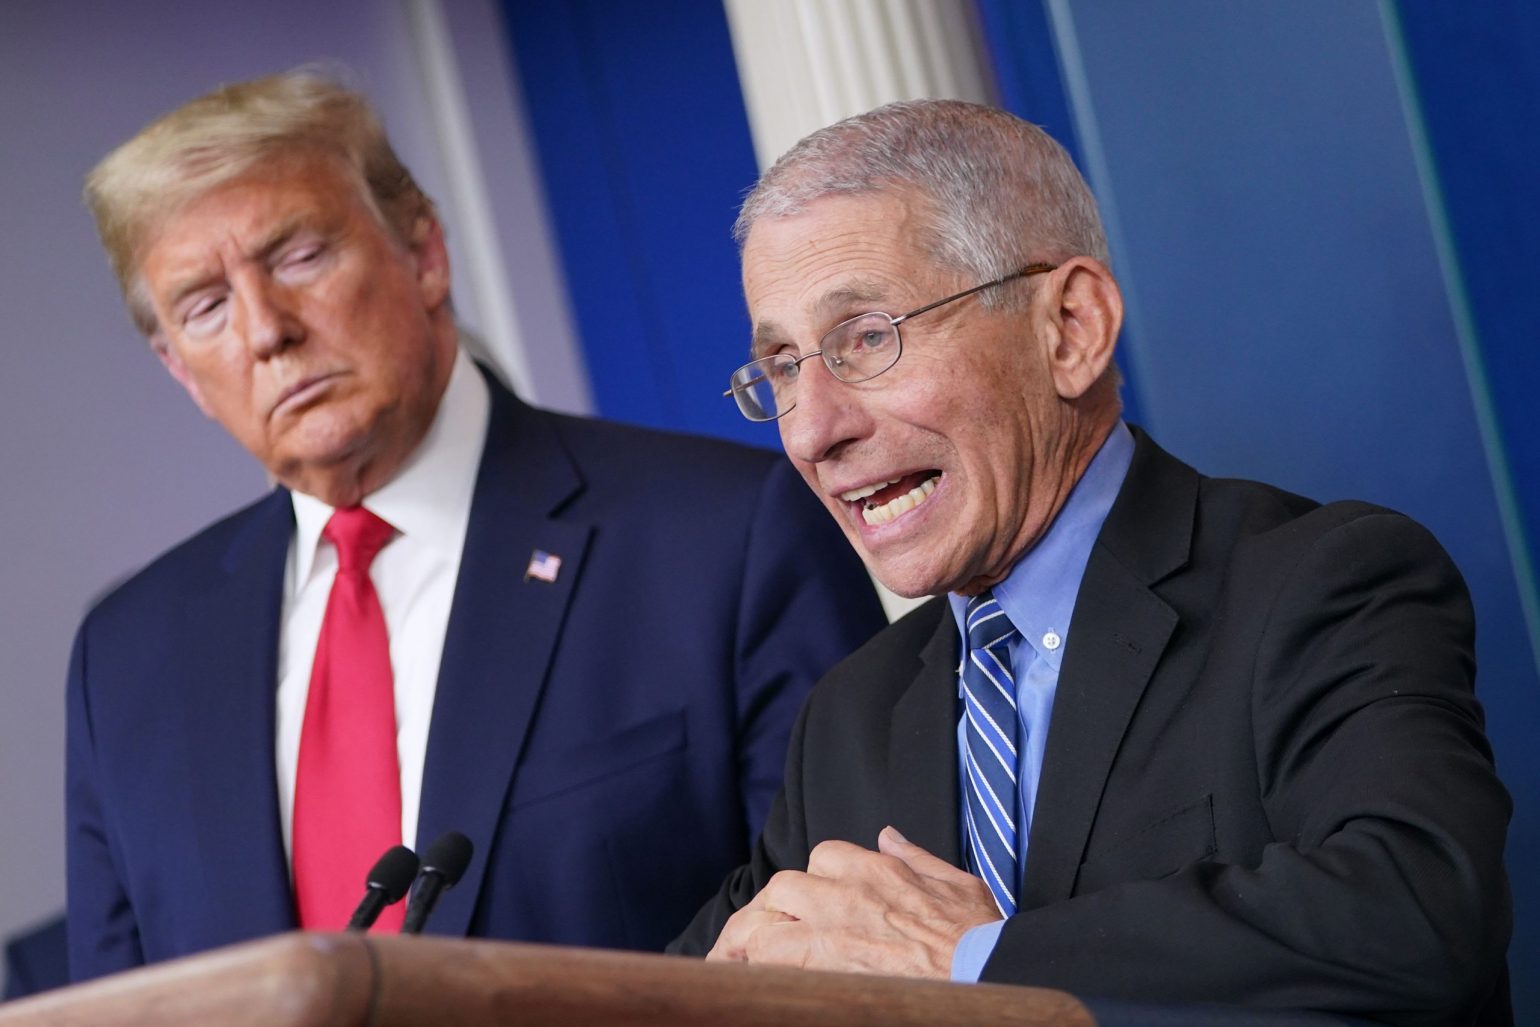 Donald Trump, Dr. Anthony Fauci